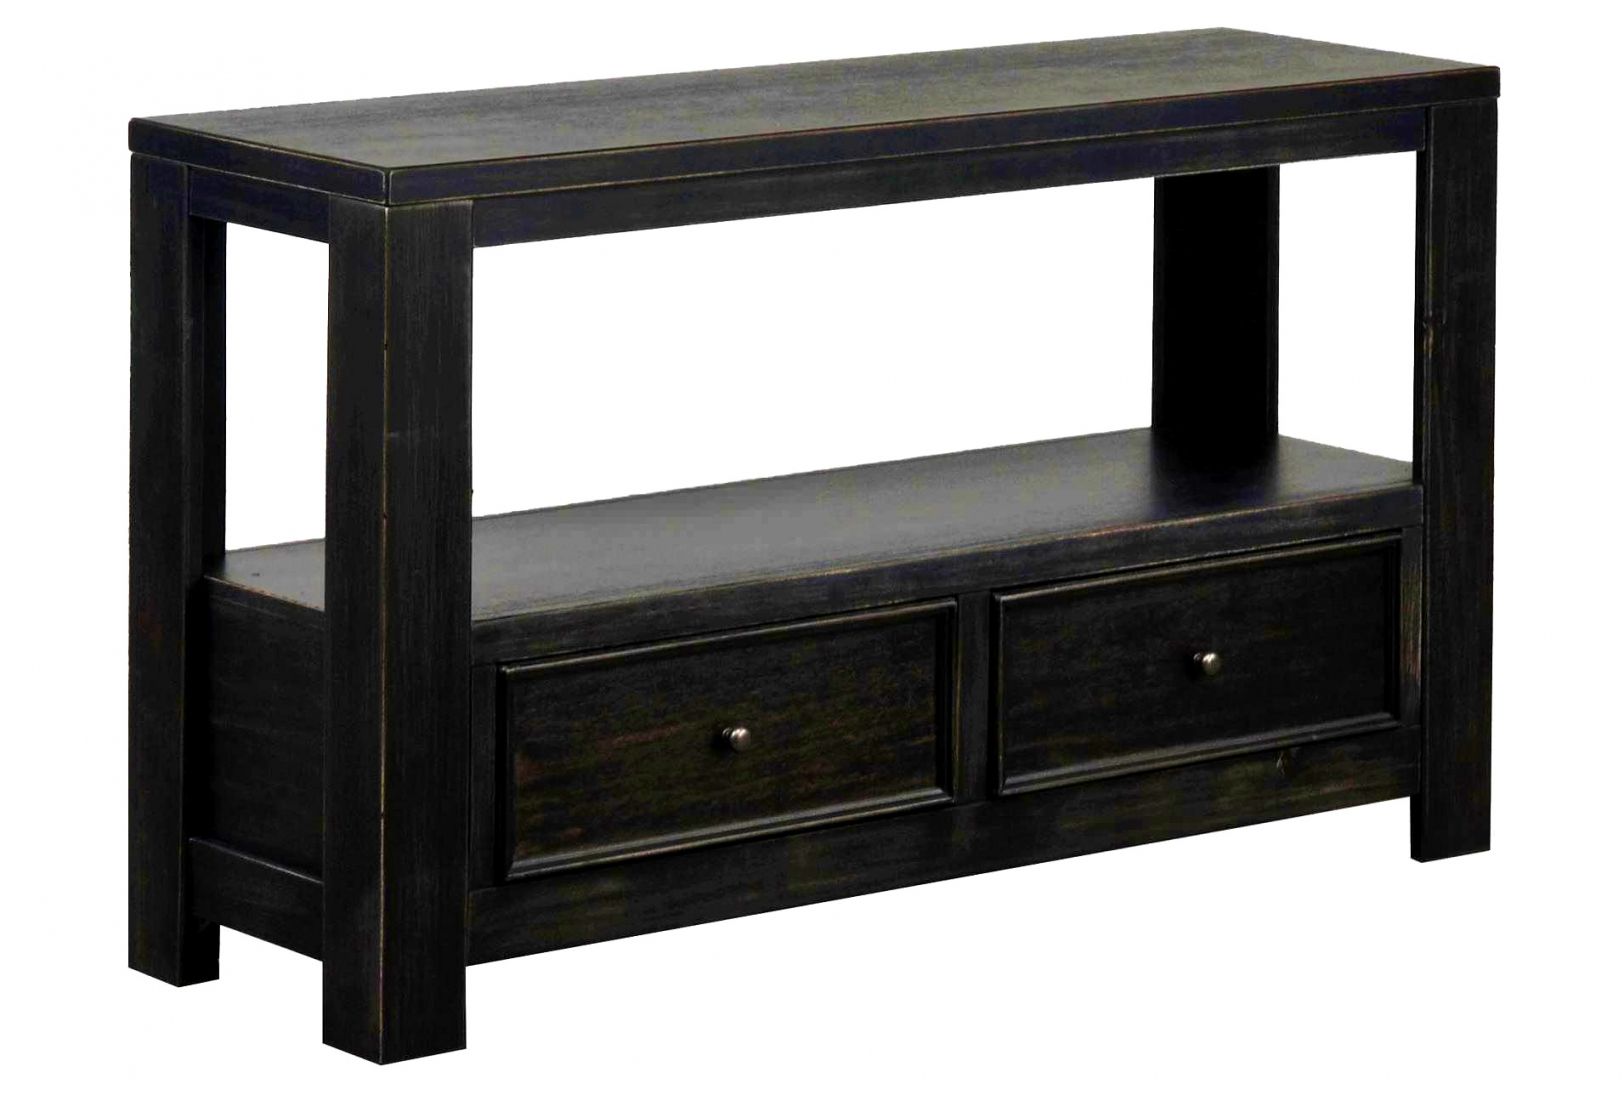 Black Sofa Table With Storage | Hawk Haven Within Aged Black Console Tables (View 12 of 20)